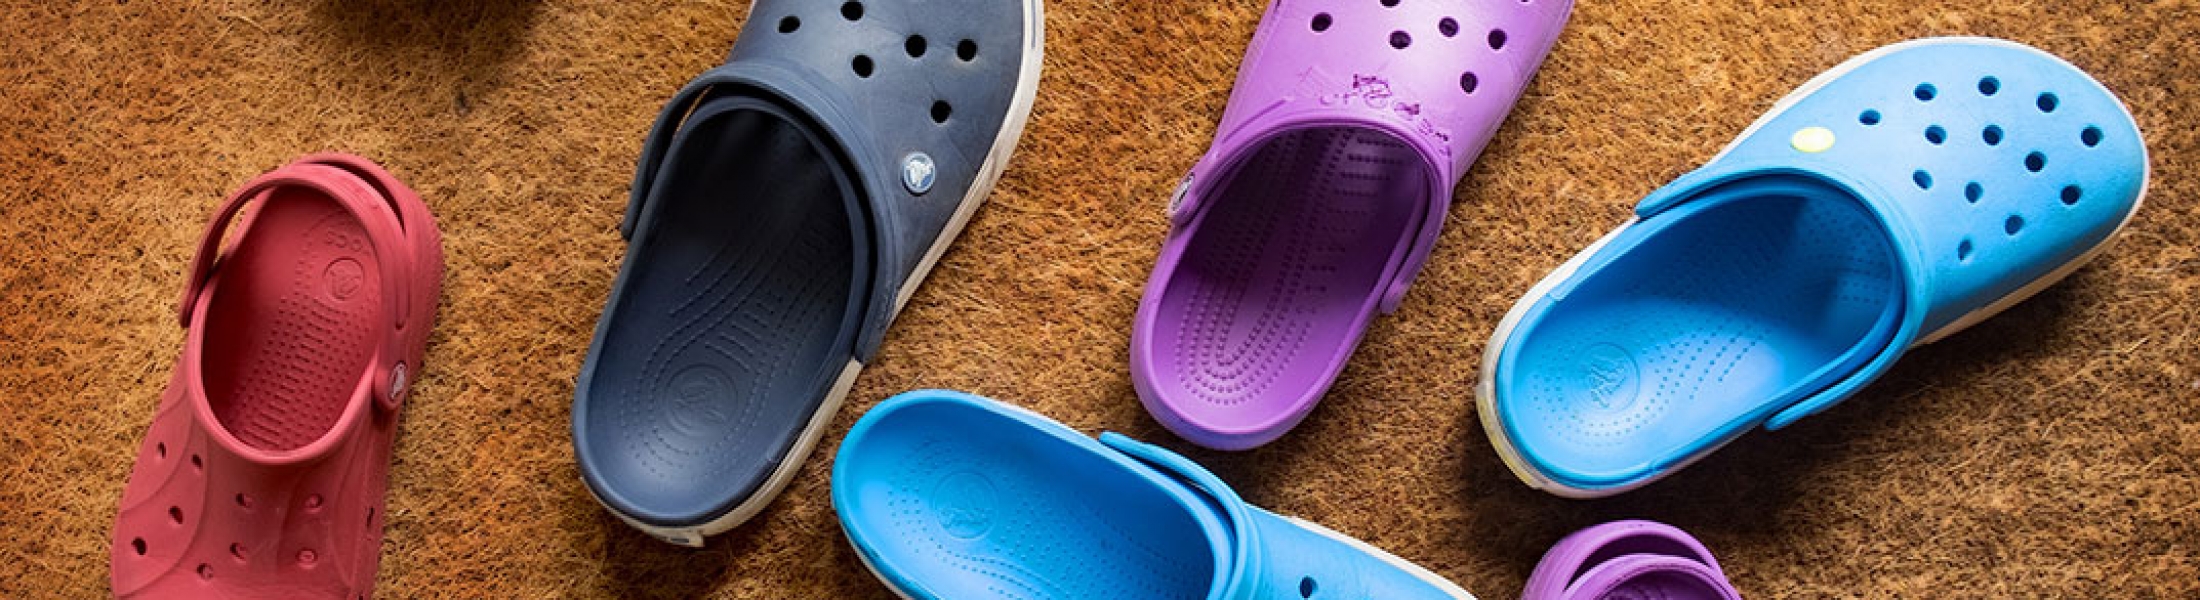 EVACOL S.A.S BANNED FROM SELLING SHOE REFERENCES REGISTERED UNDER CROCS ...